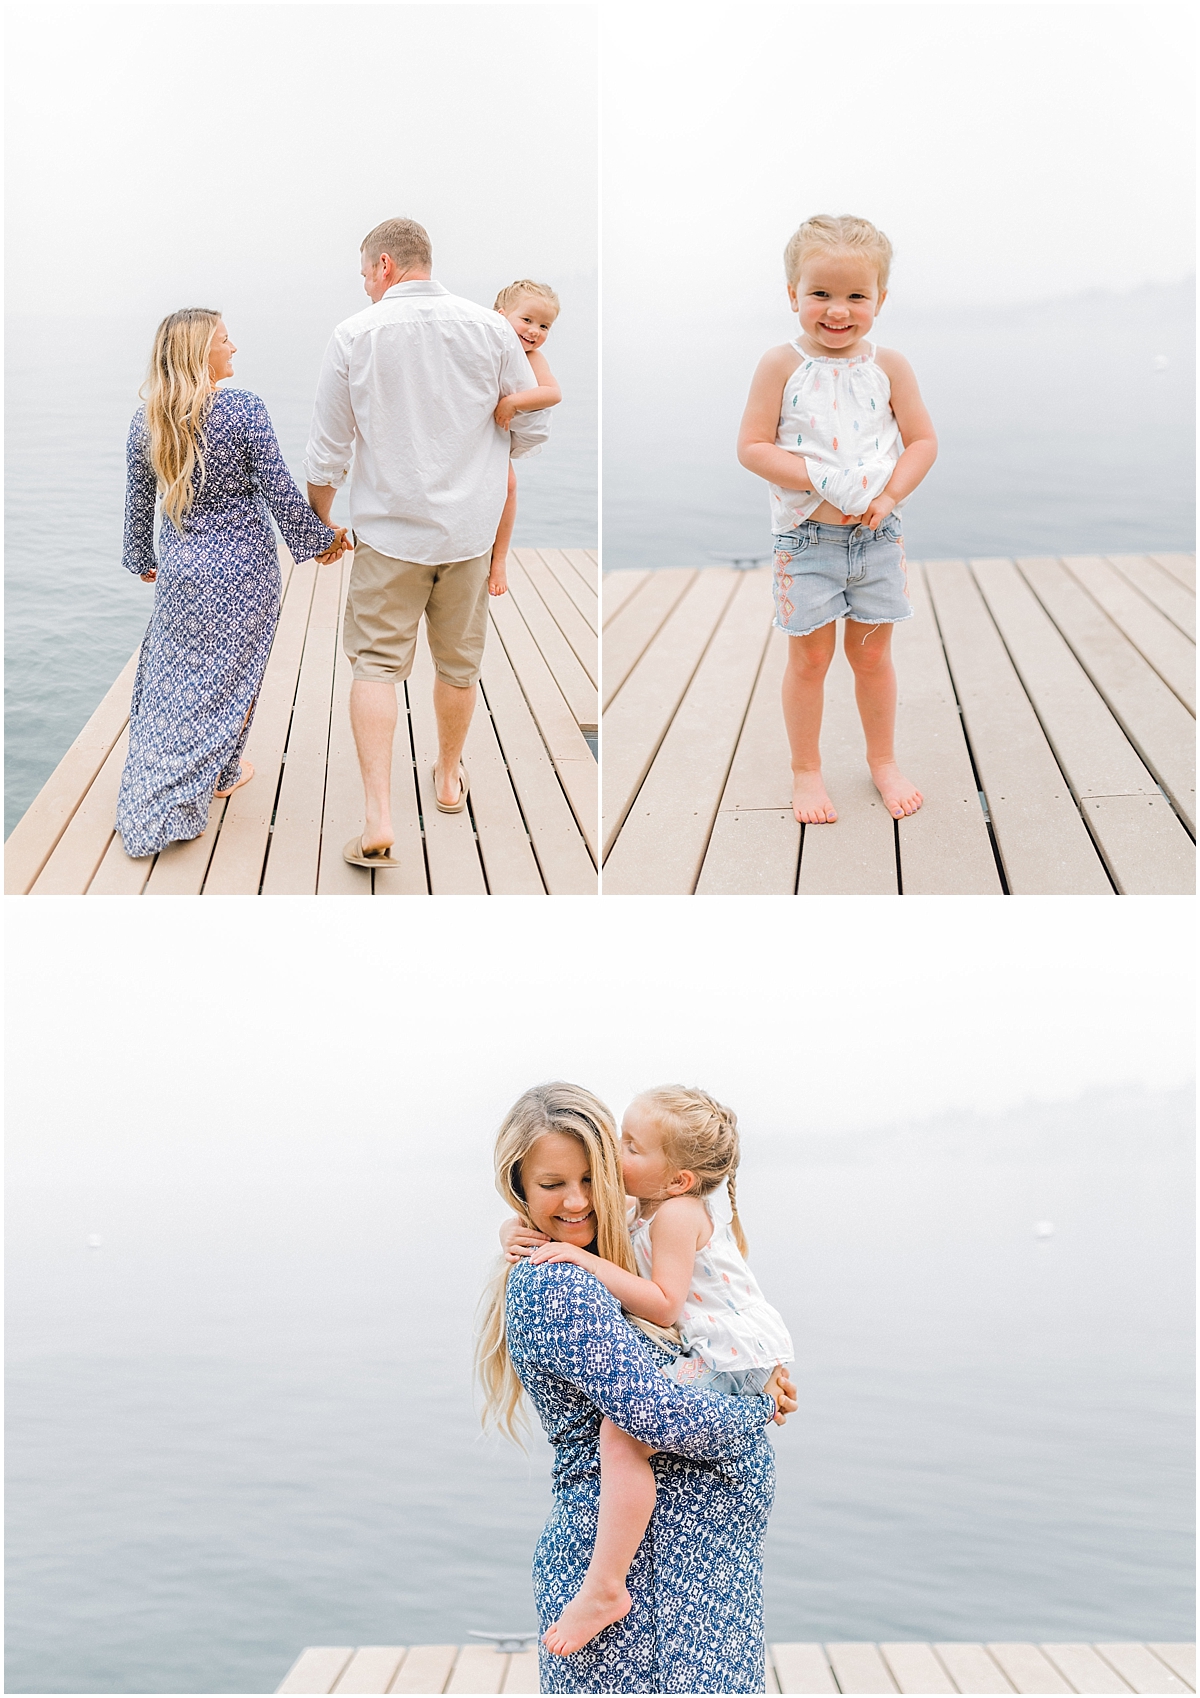 Emma Rose Company | PNW Family Portrait Photographer | Light and Airy Photography Style | What to Wear to Family Pictures | Kindred Presets | Lake Chelan Wedding Portrait Photographer_0090.jpg